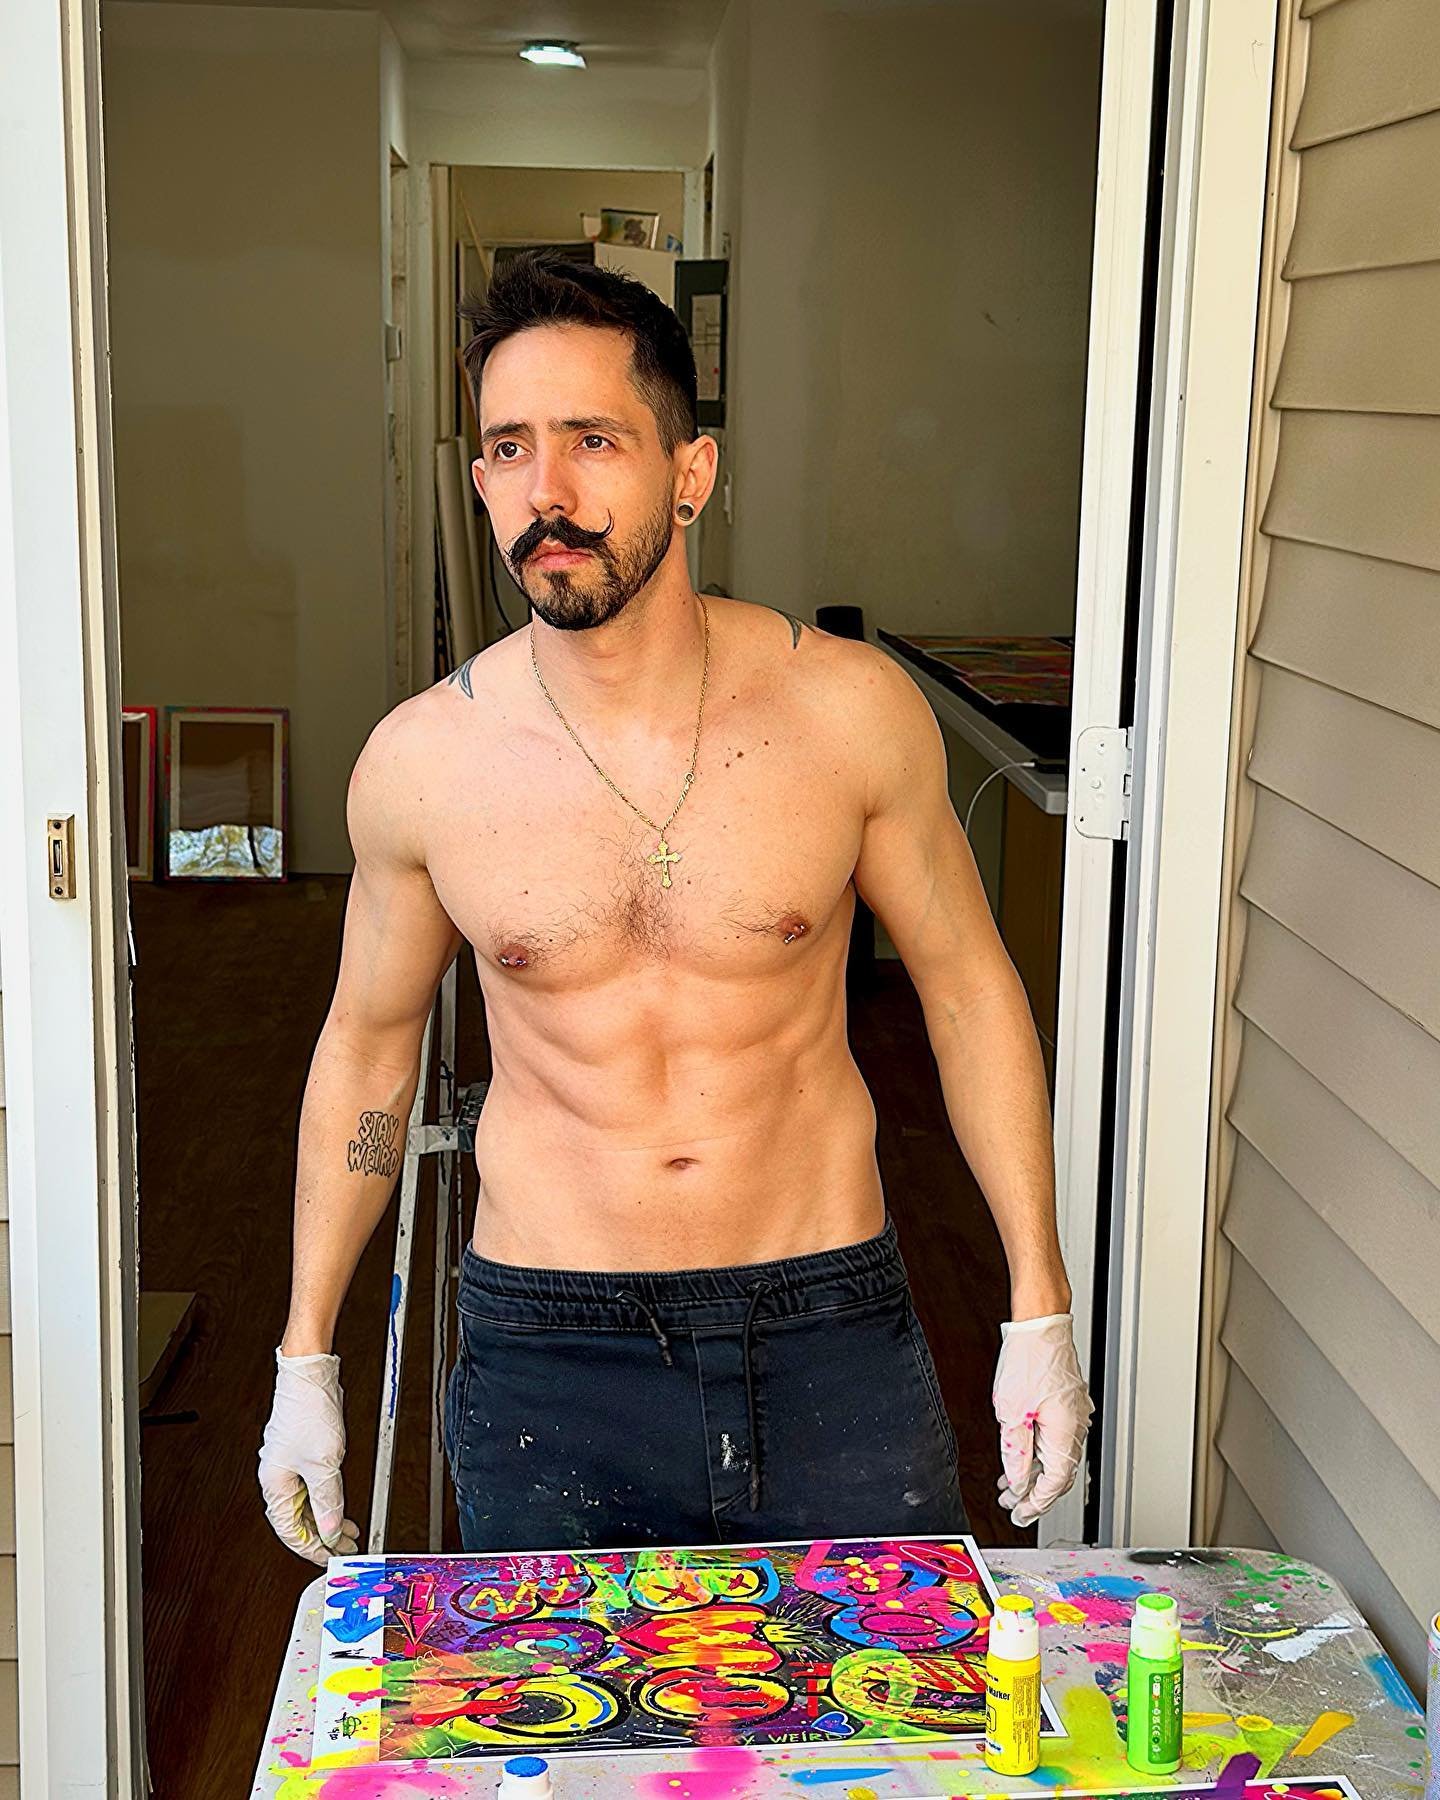 How boy summer! 🤣
My condo renovation is moving slower than I thought, so I had to paint in my front studio since the studio is now where near ready. 
.#mustache #studiolife #artliving #model #norwalkct #gymlife